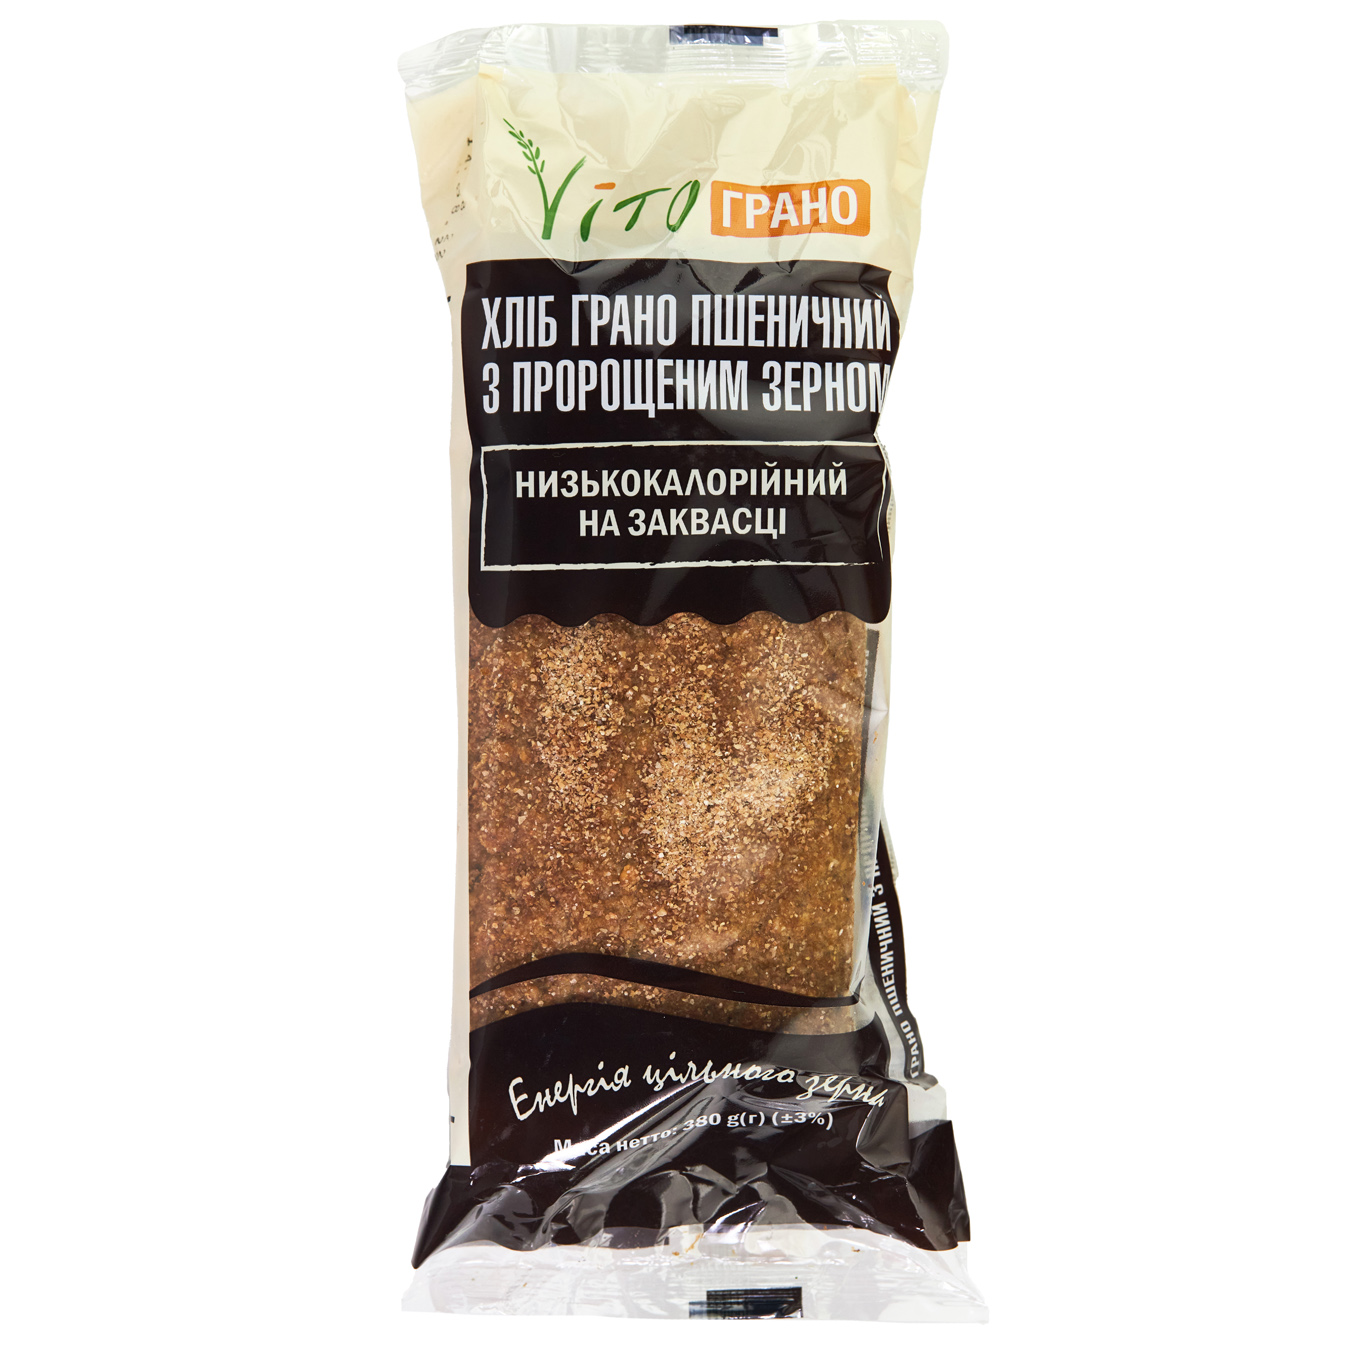 VitoGrano Bread Wheat with Sprouted Grains 380g